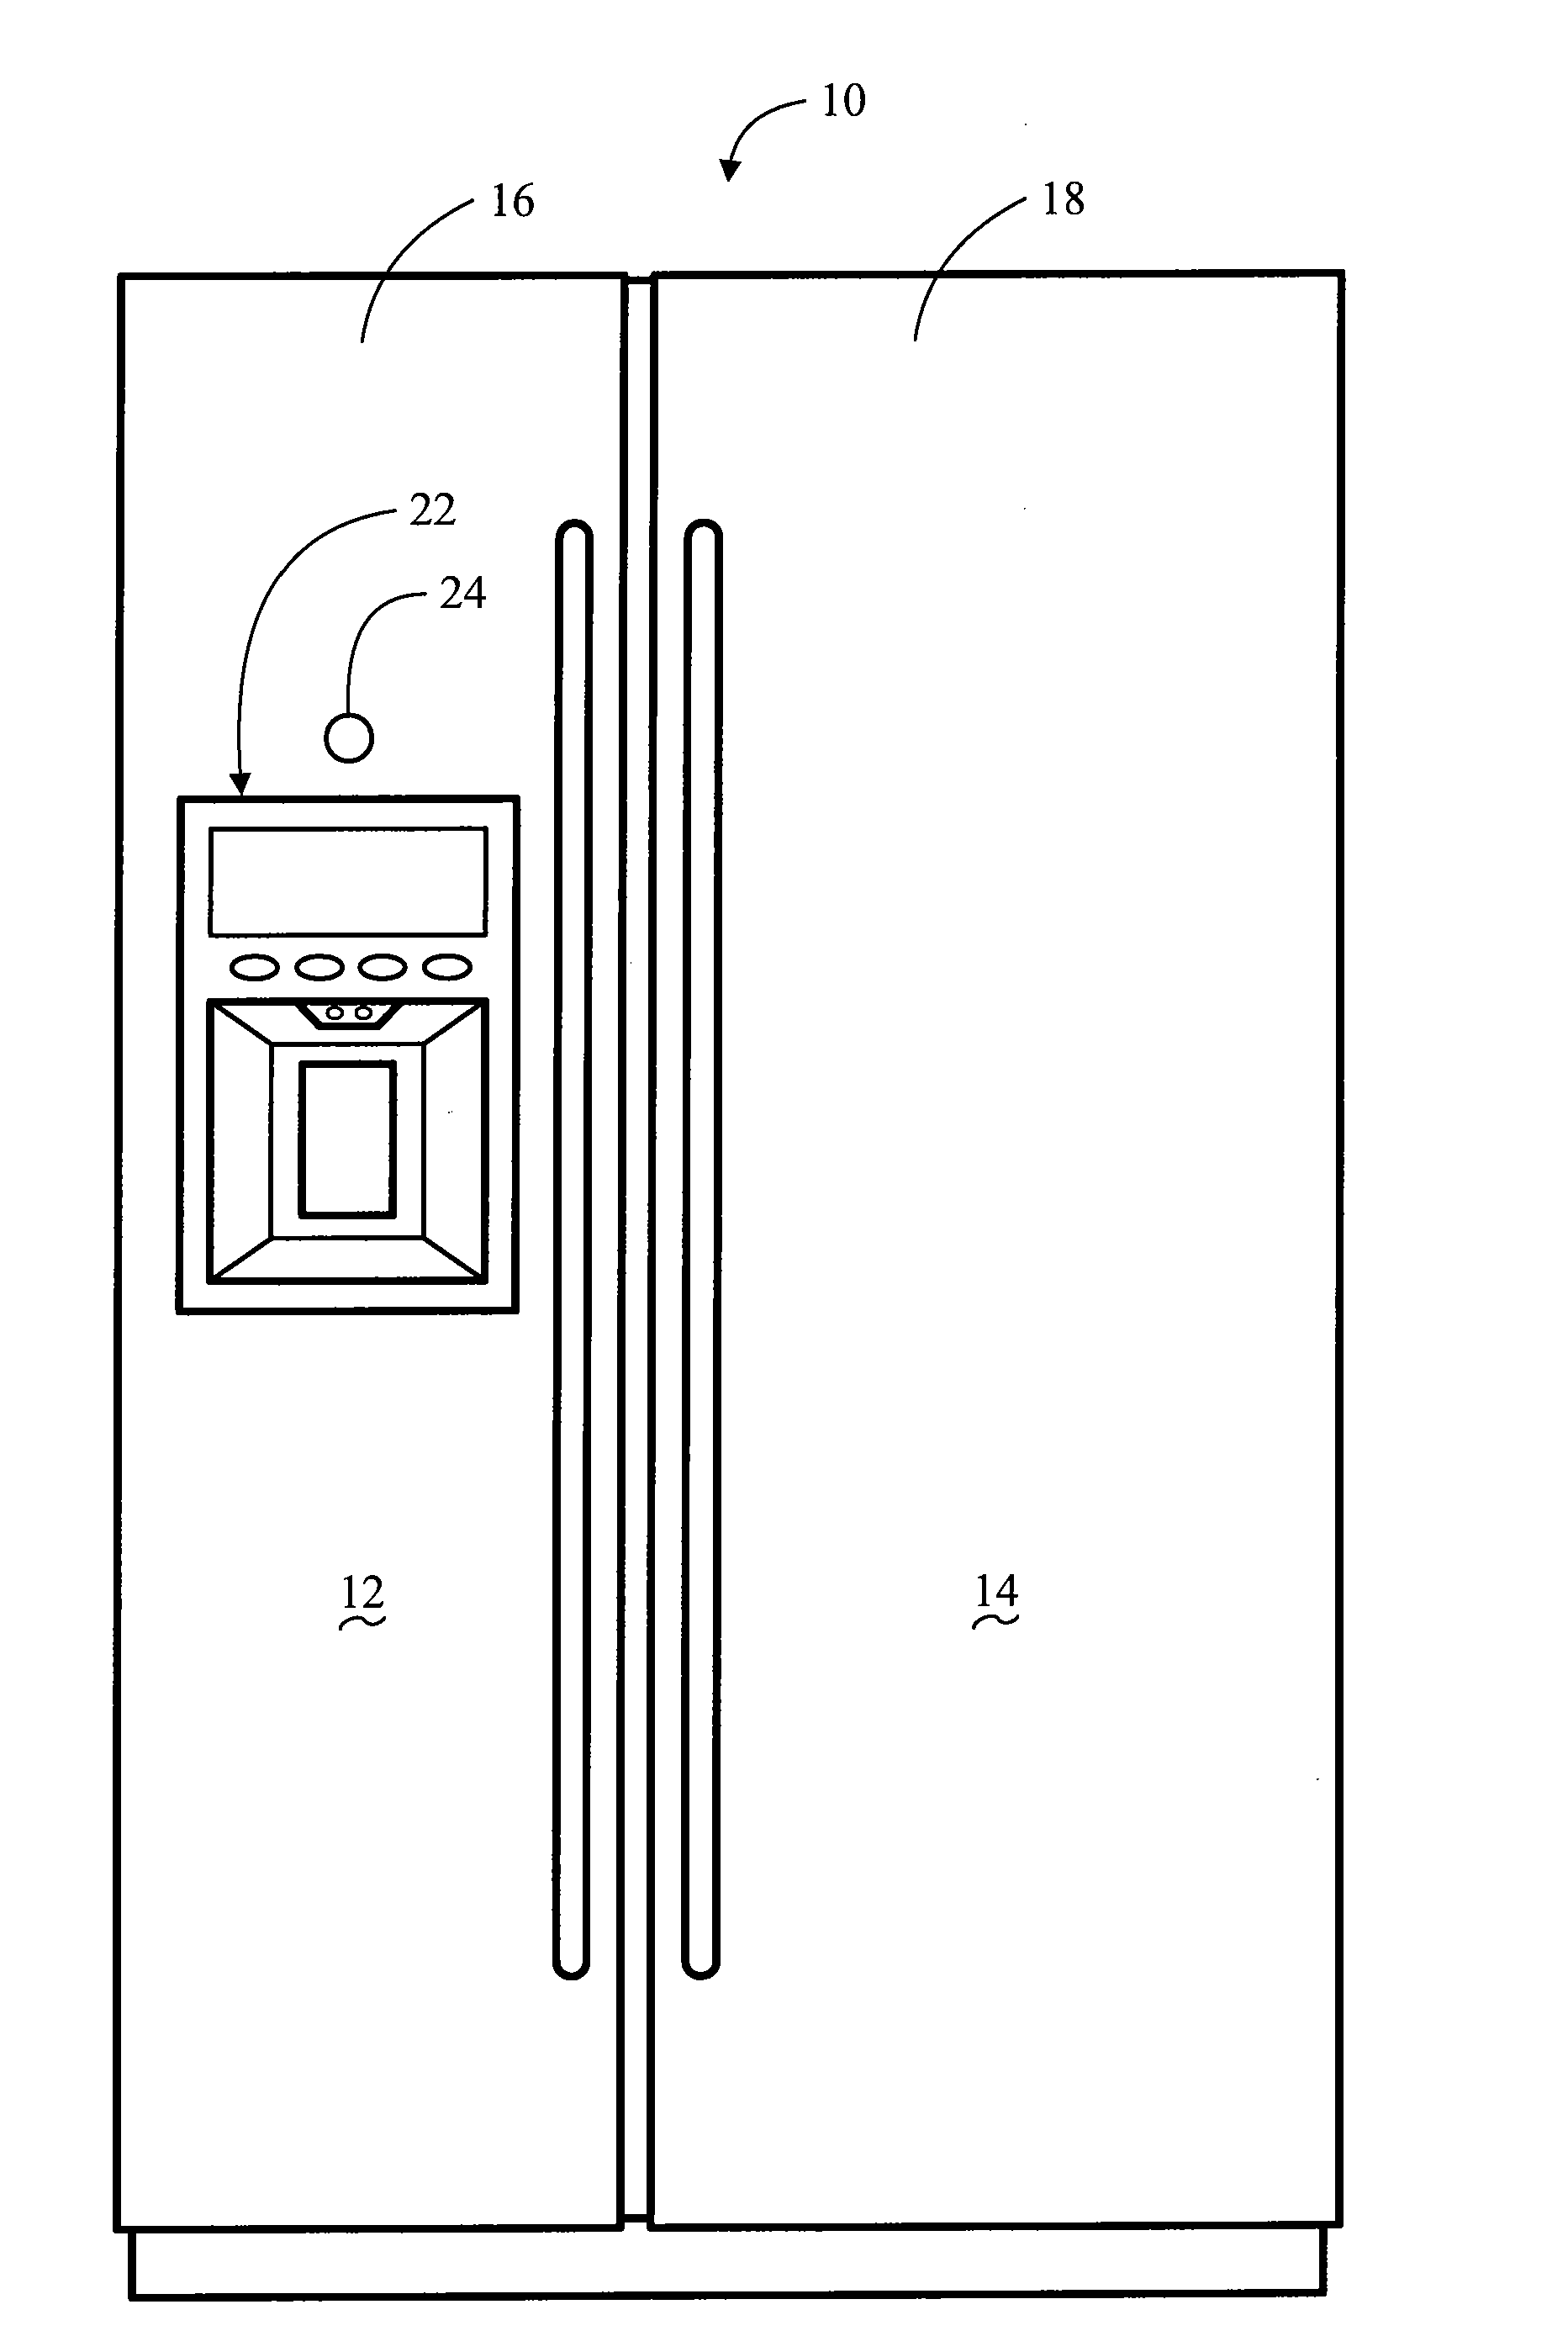 Beverage dispensing system with machine vision